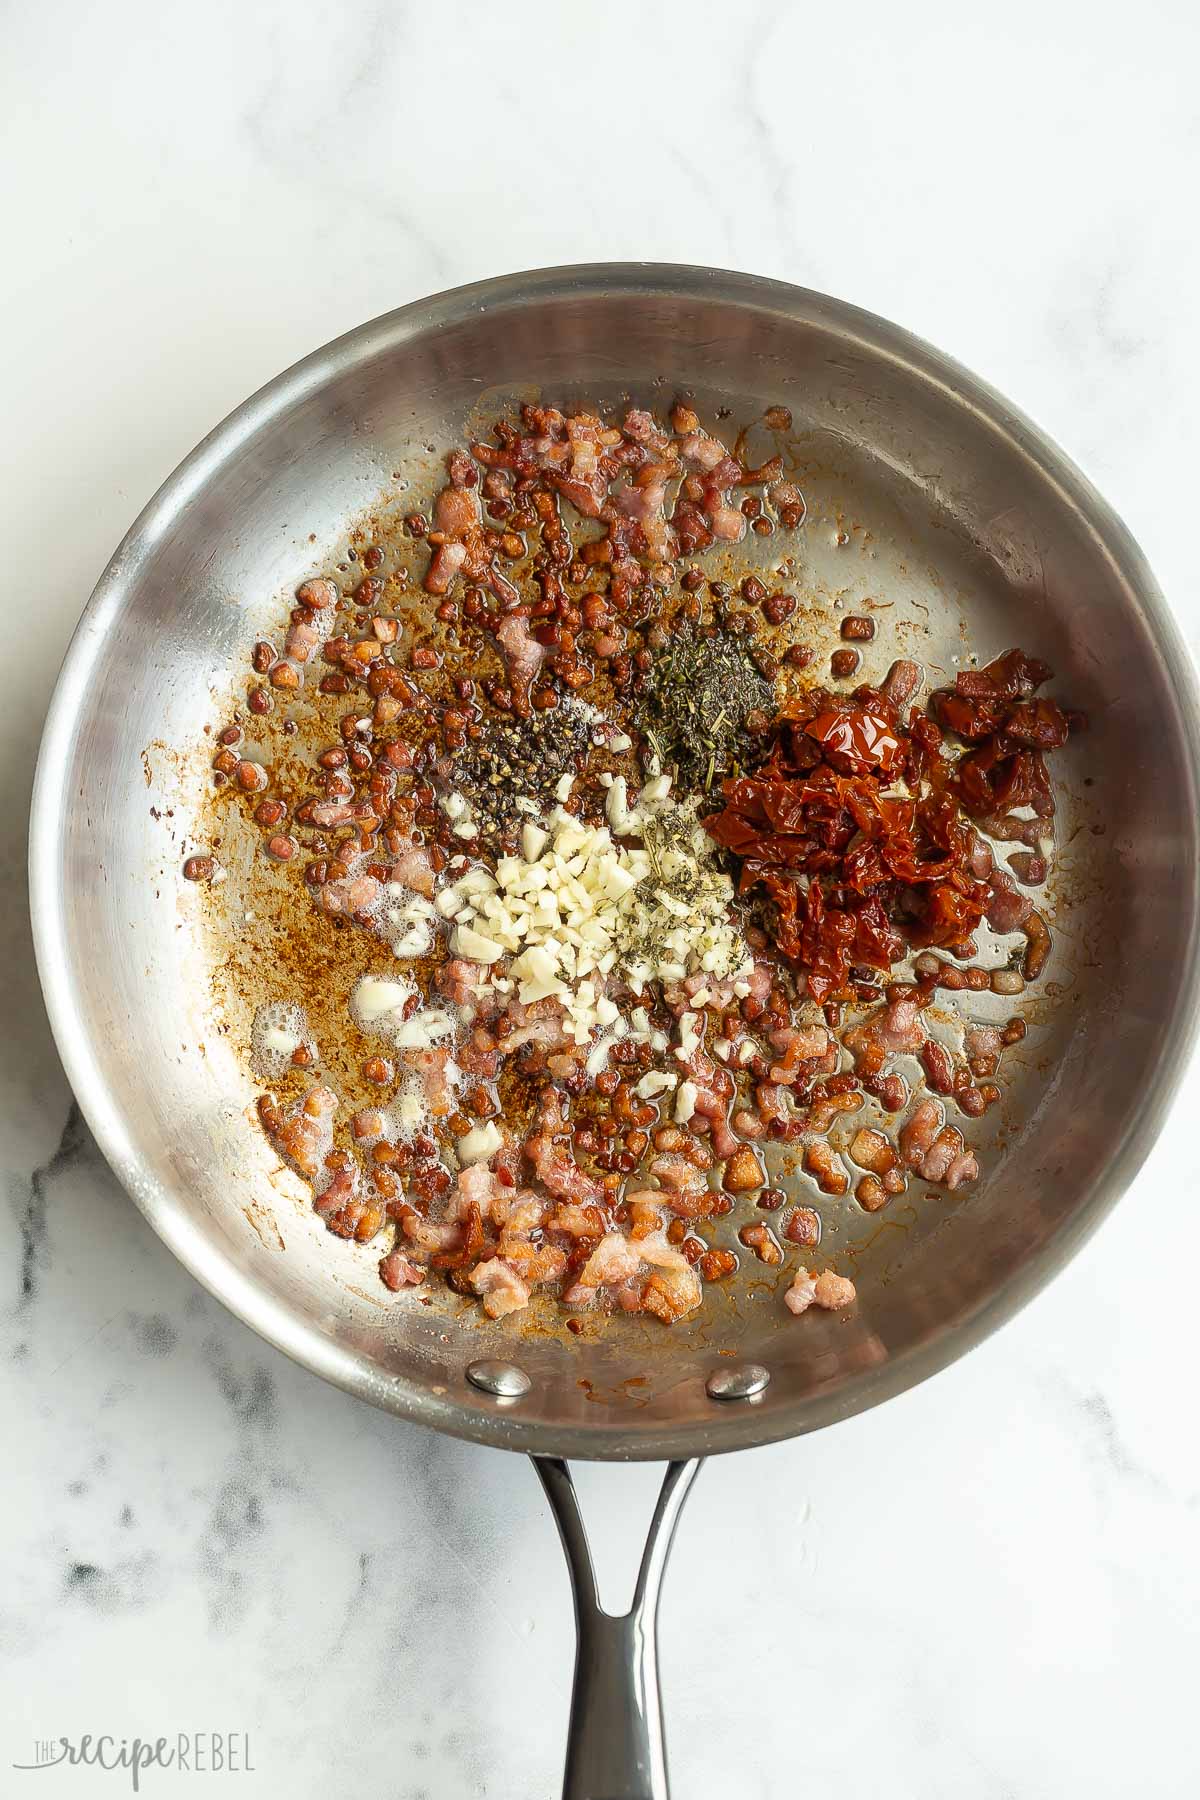 garlic and seasonings added to bacon in skillet.